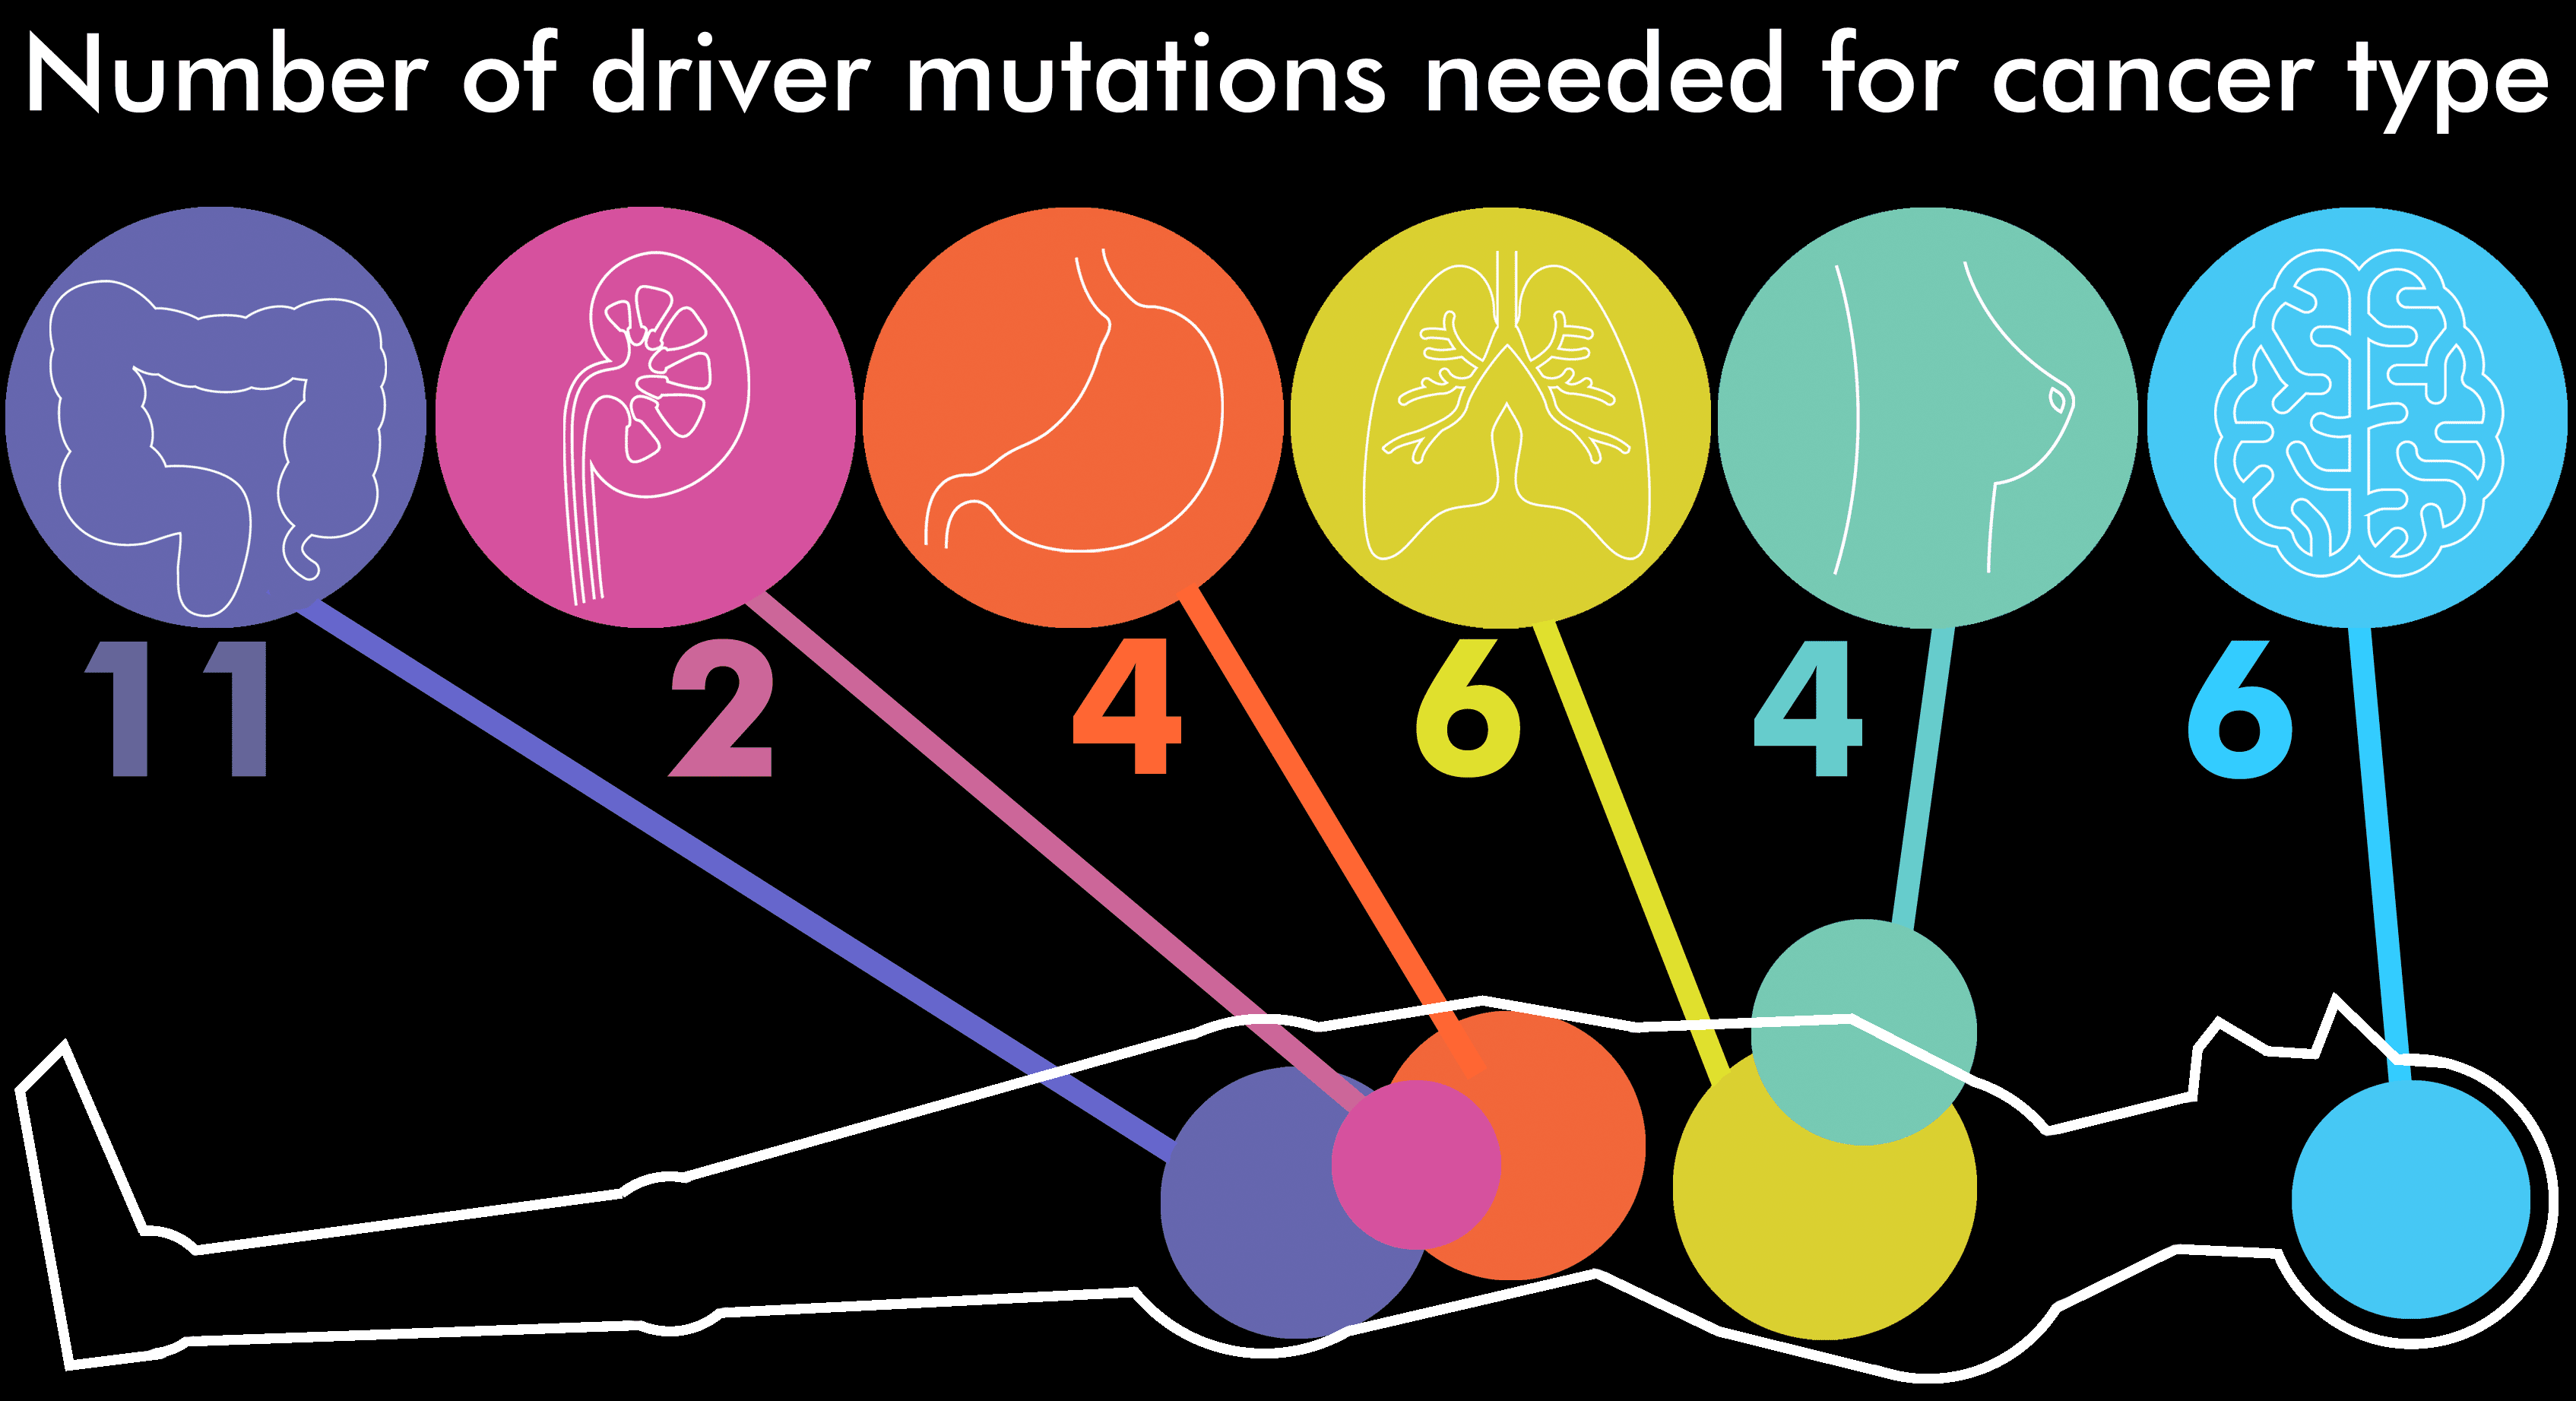 Approximate number of driver mutations needed to cause cancer by area of the body. Image credits: The Sanger Institute.